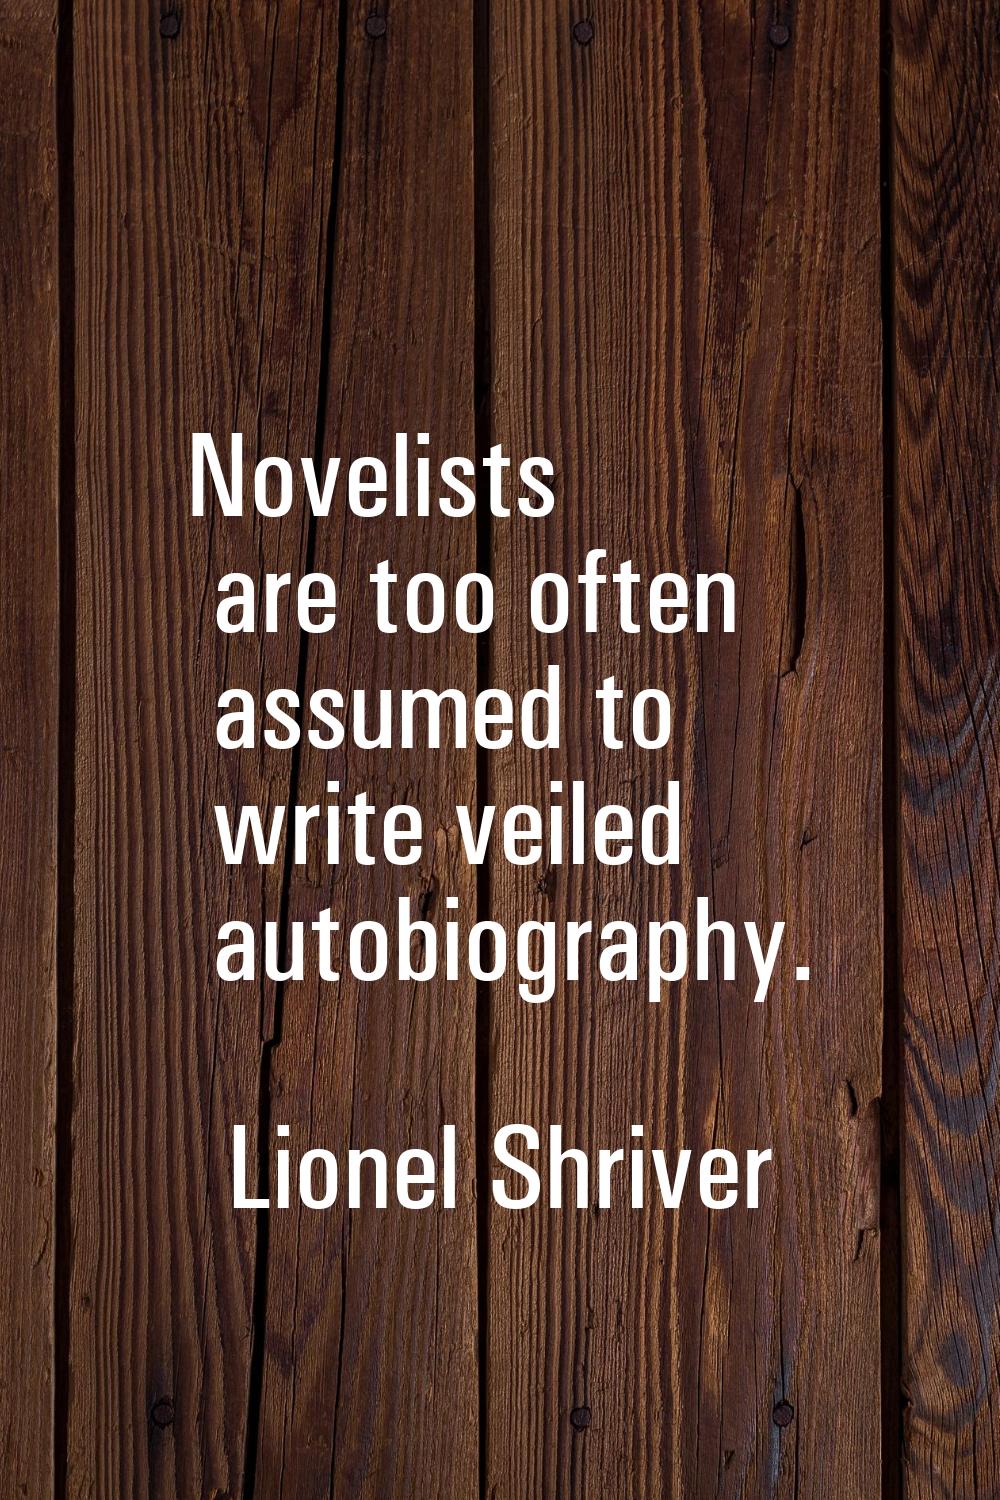 Novelists are too often assumed to write veiled autobiography.